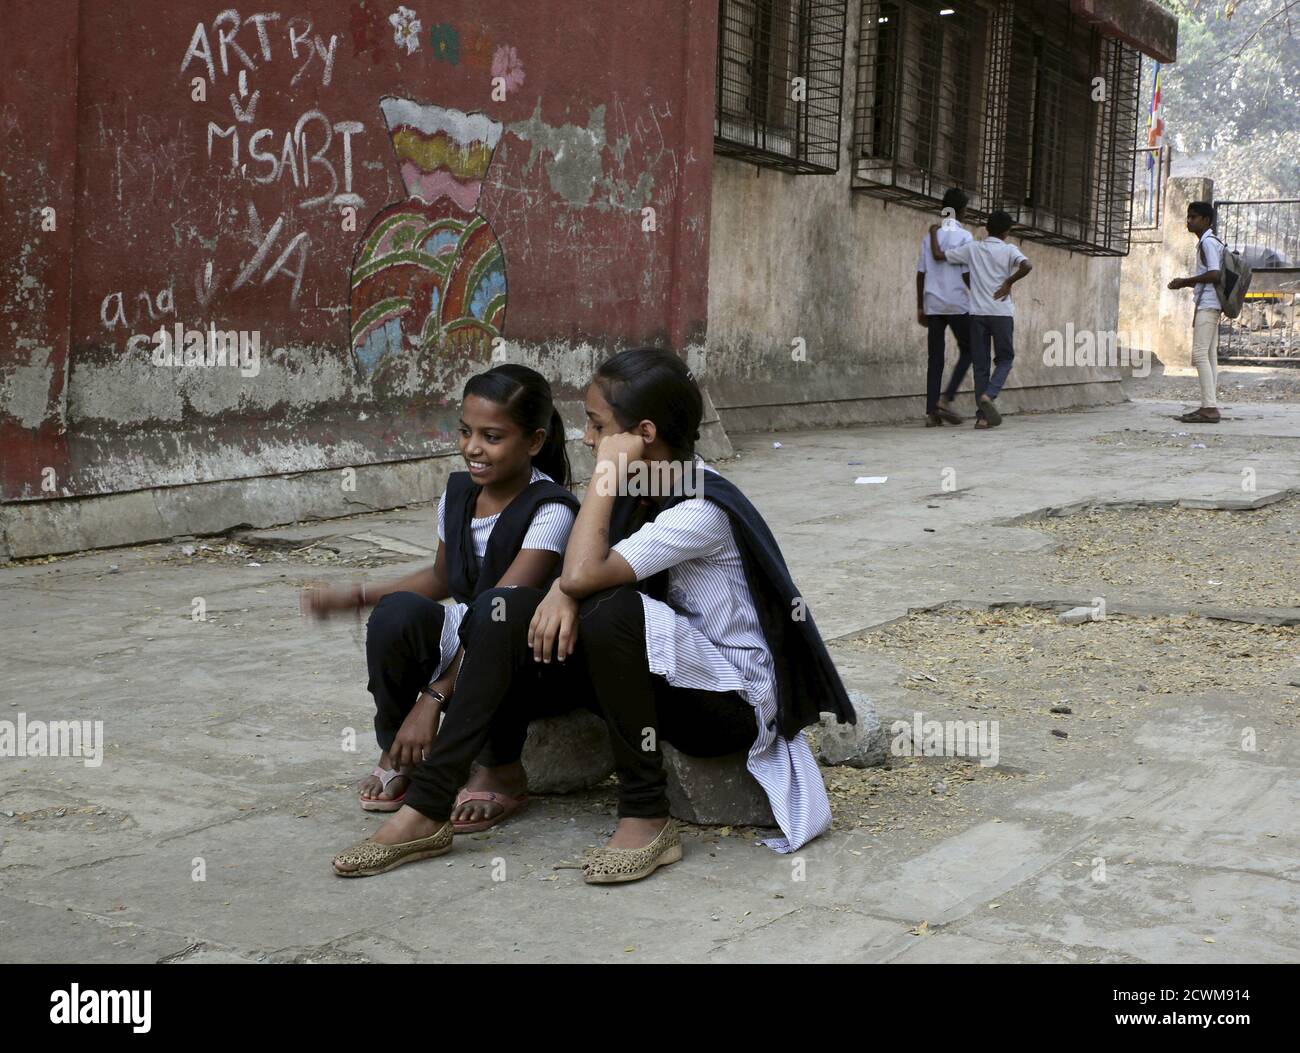 Female students sit in the playground of Shahaji Nagar Municipal Hindi School at Cheeta Camp area in Mumbai, February 24, 2015. As India grapples to stem rising violence against women, activists say classes like these - which confront traditional gender roles and challenge sexism amongst the youth - are key to changing attitudes and curbing widespread gender abuse. Picture taken February 24, 2015. To match Thomson Reuters Foundation Feature story INDIA-GENDER/EDUCATION REUTERS/Nita Bhalla Stock Photo